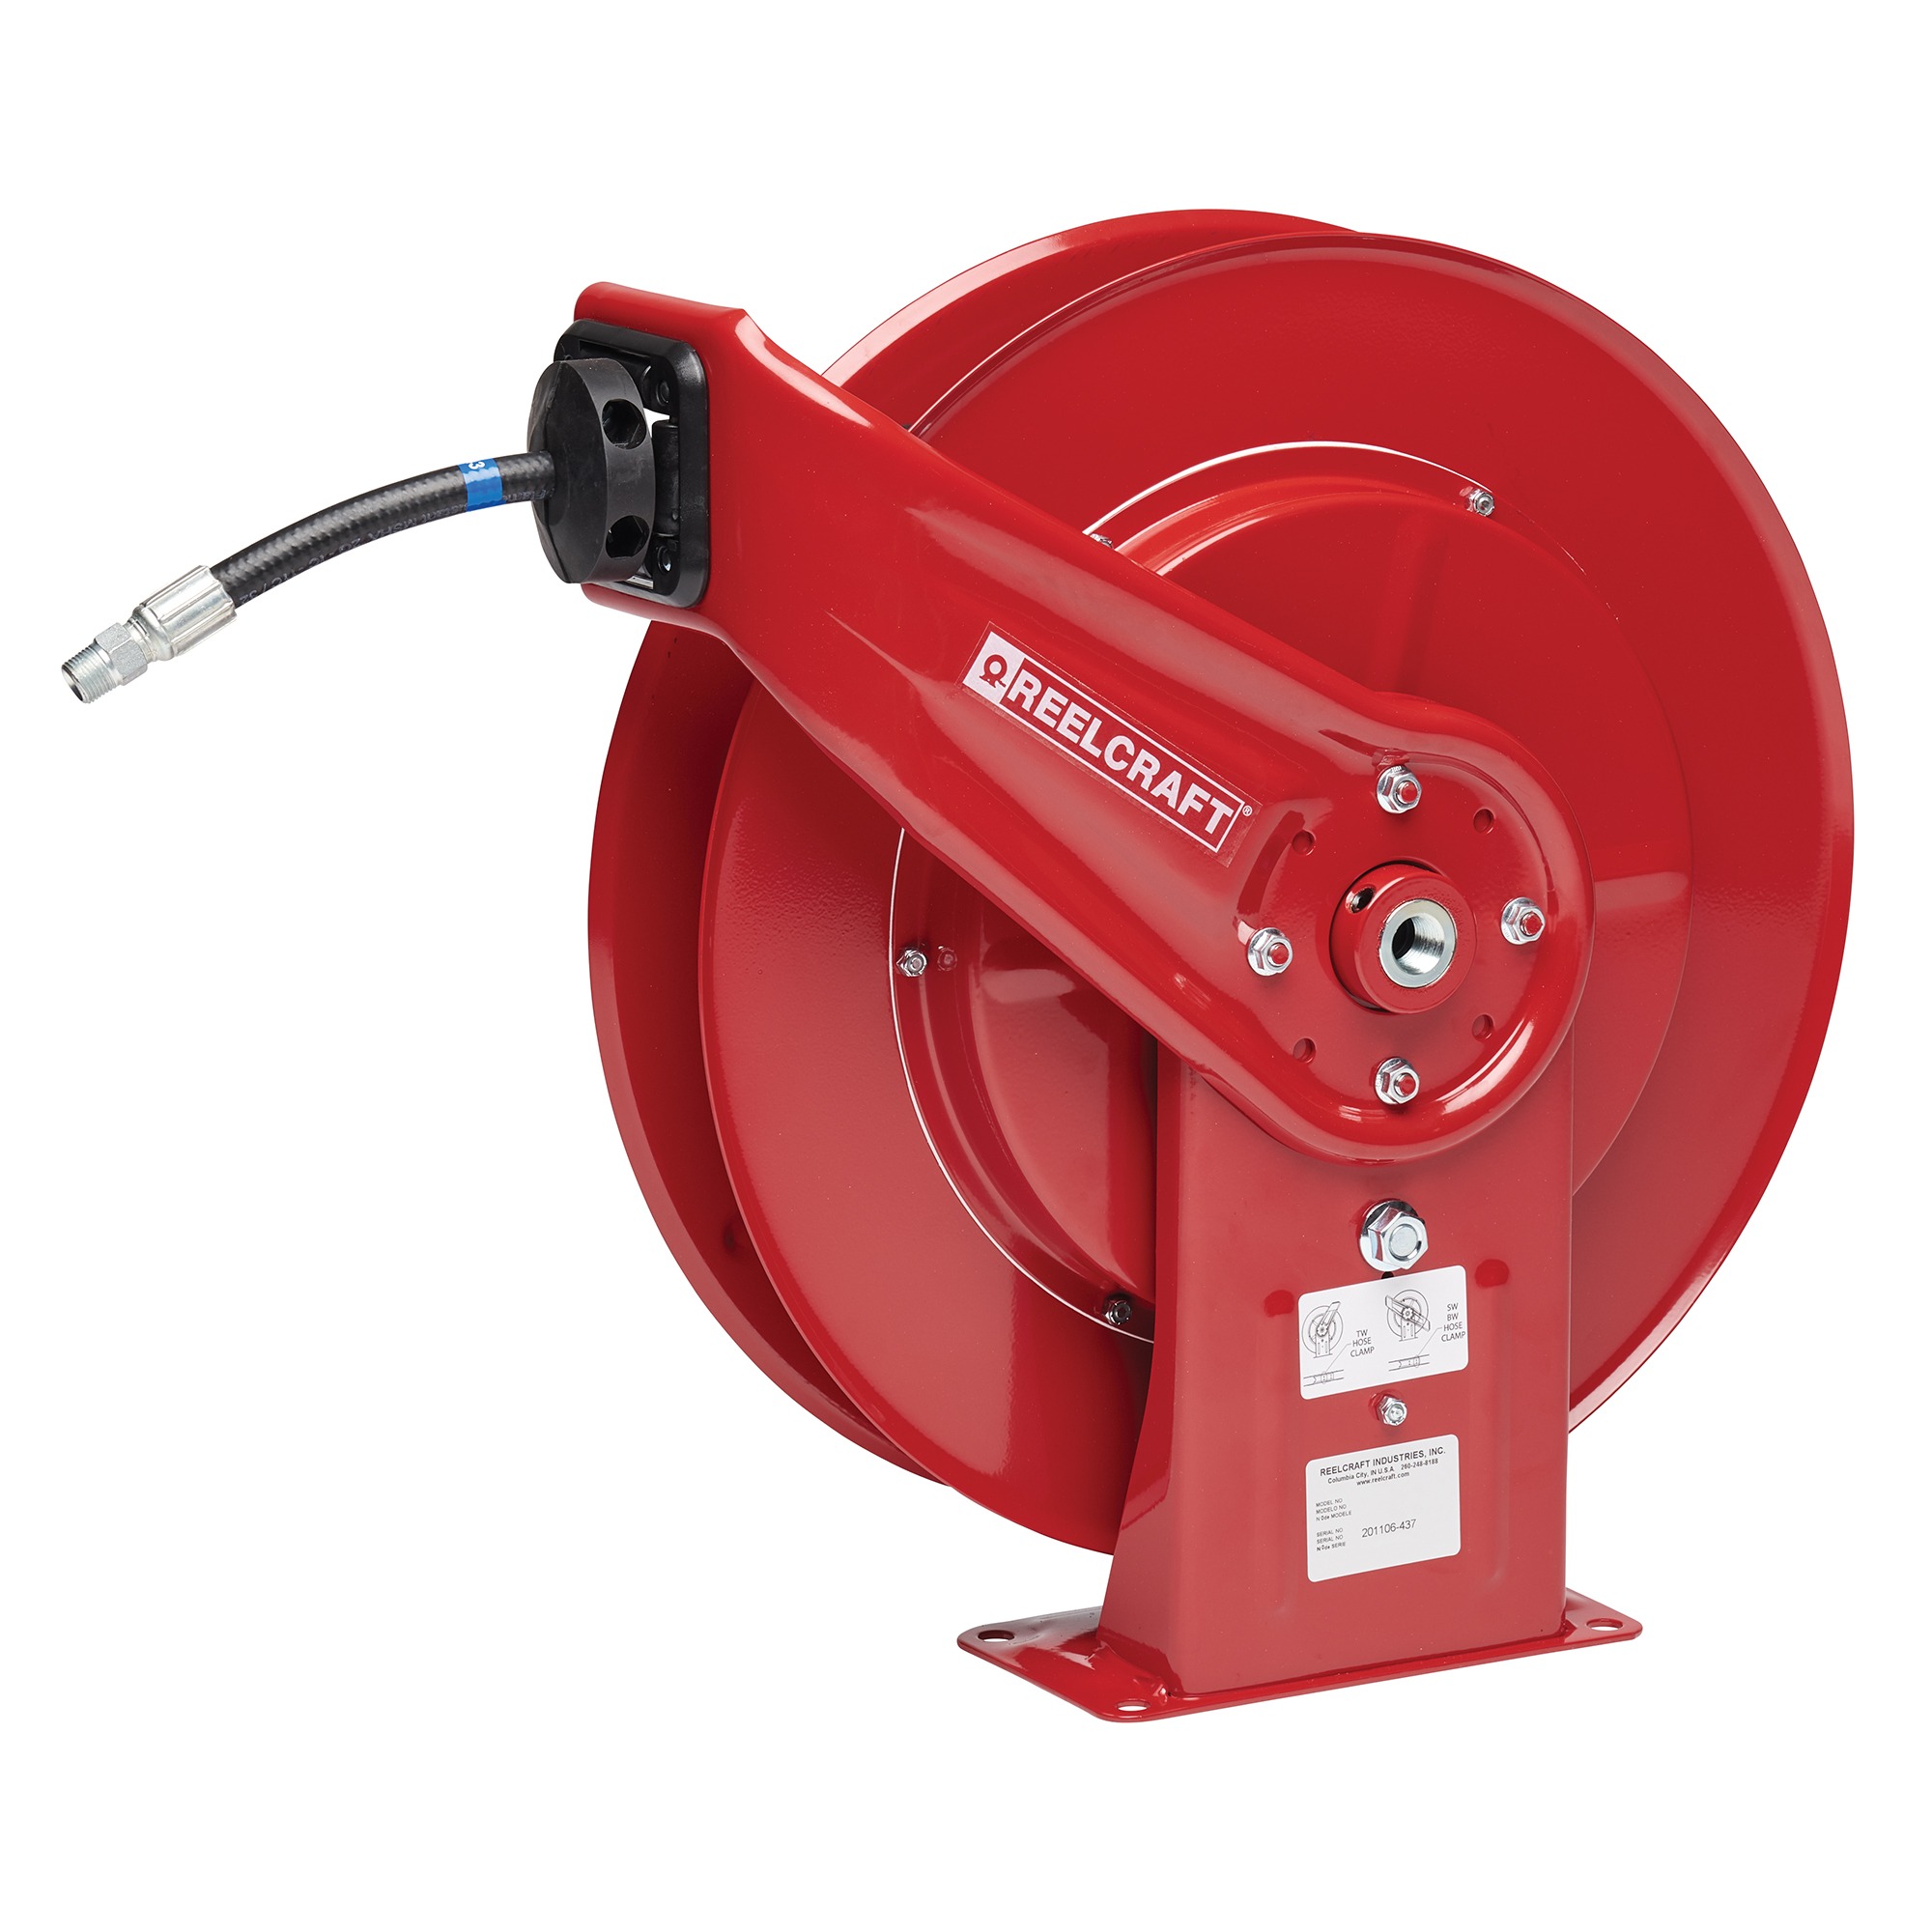 IRN3102 Grease Hose Reel,Hose Reels, Air Hose Reels,Shop Equipment - Air,  Oil, Grease, and Water Hose Reels for Auto Shops and Hobbyists